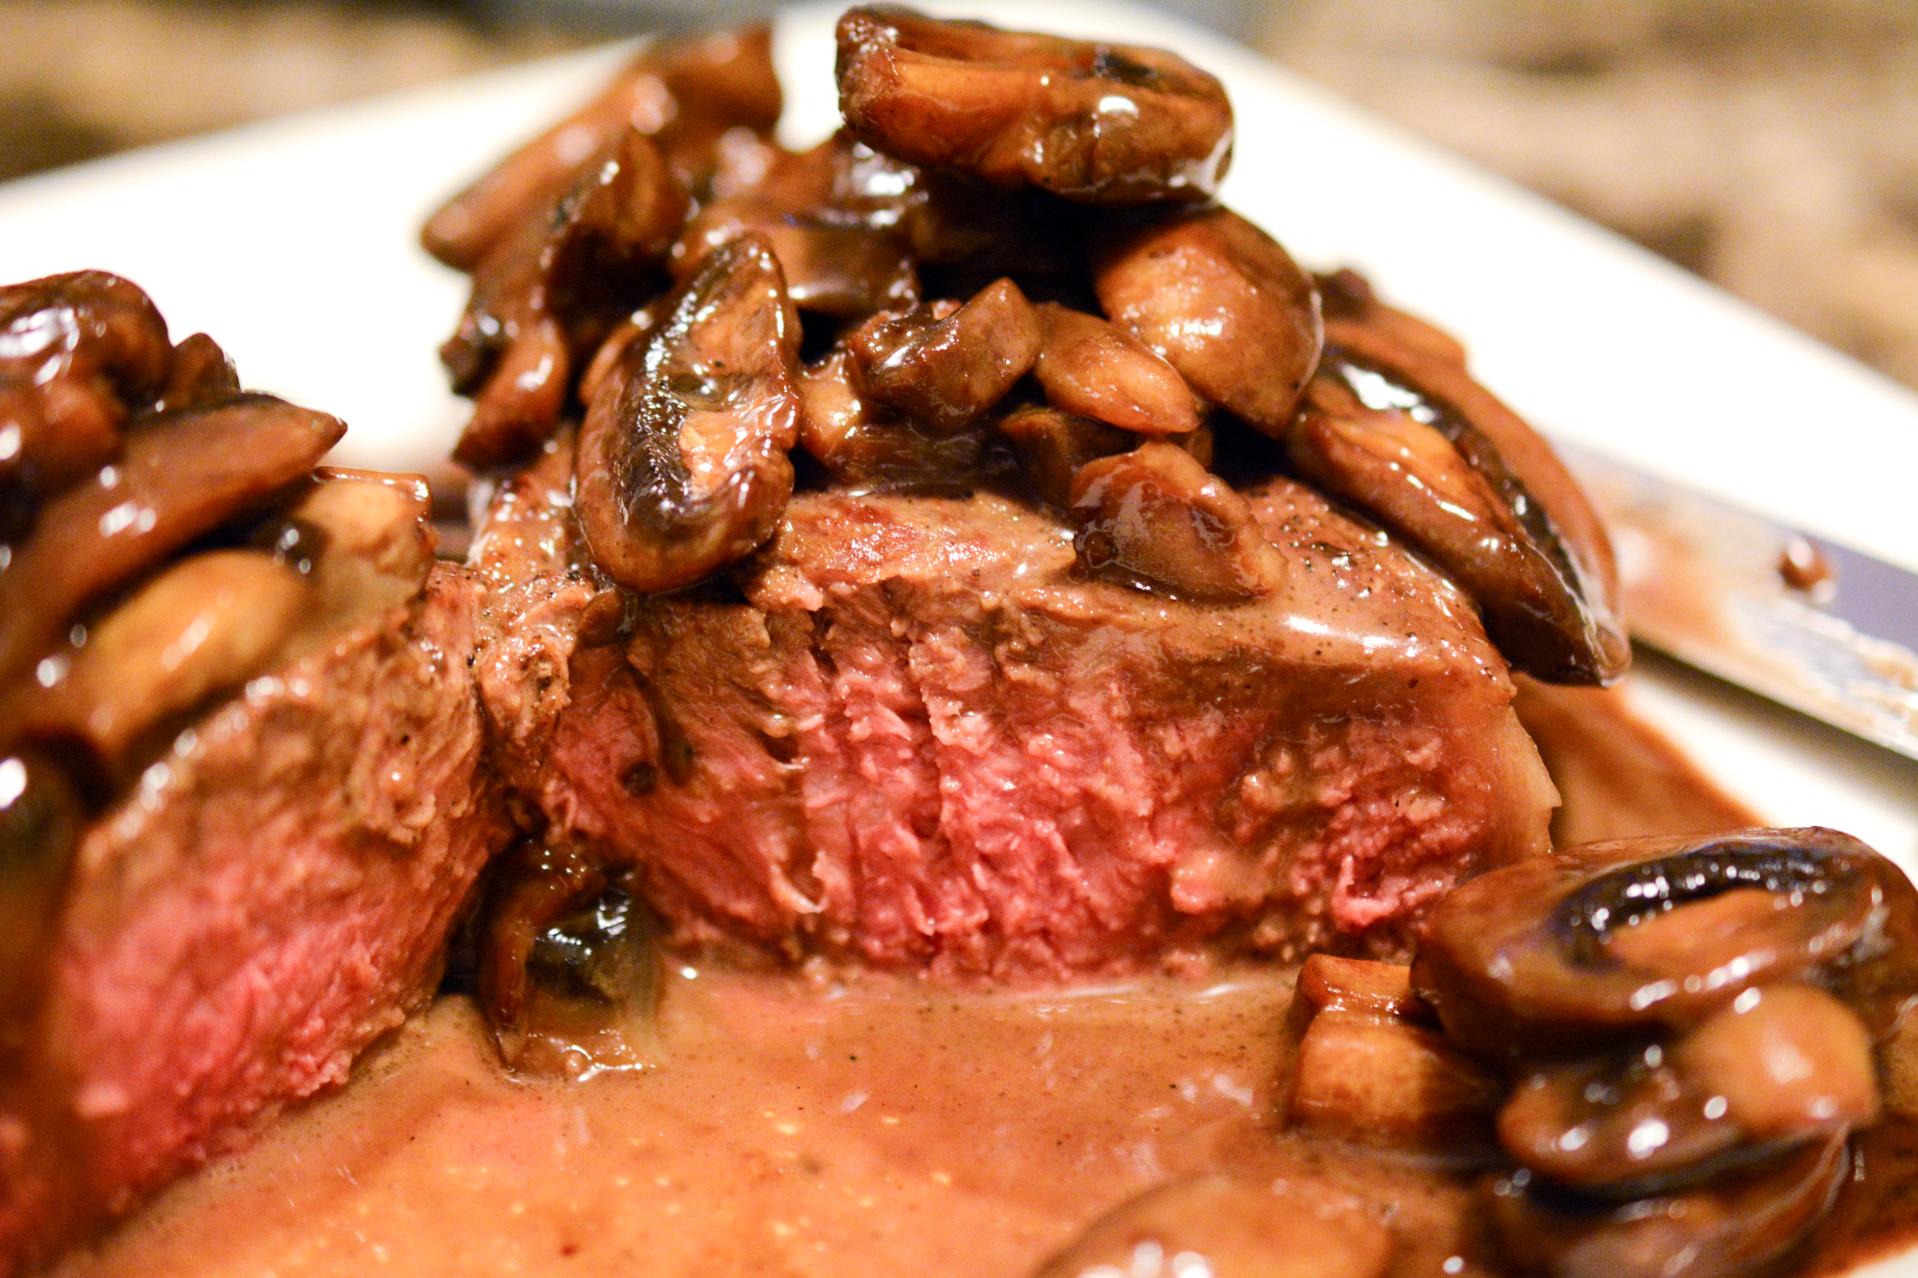  Your taste buds will thank you when you try this pepper steak with port-wine mushroom sauce.